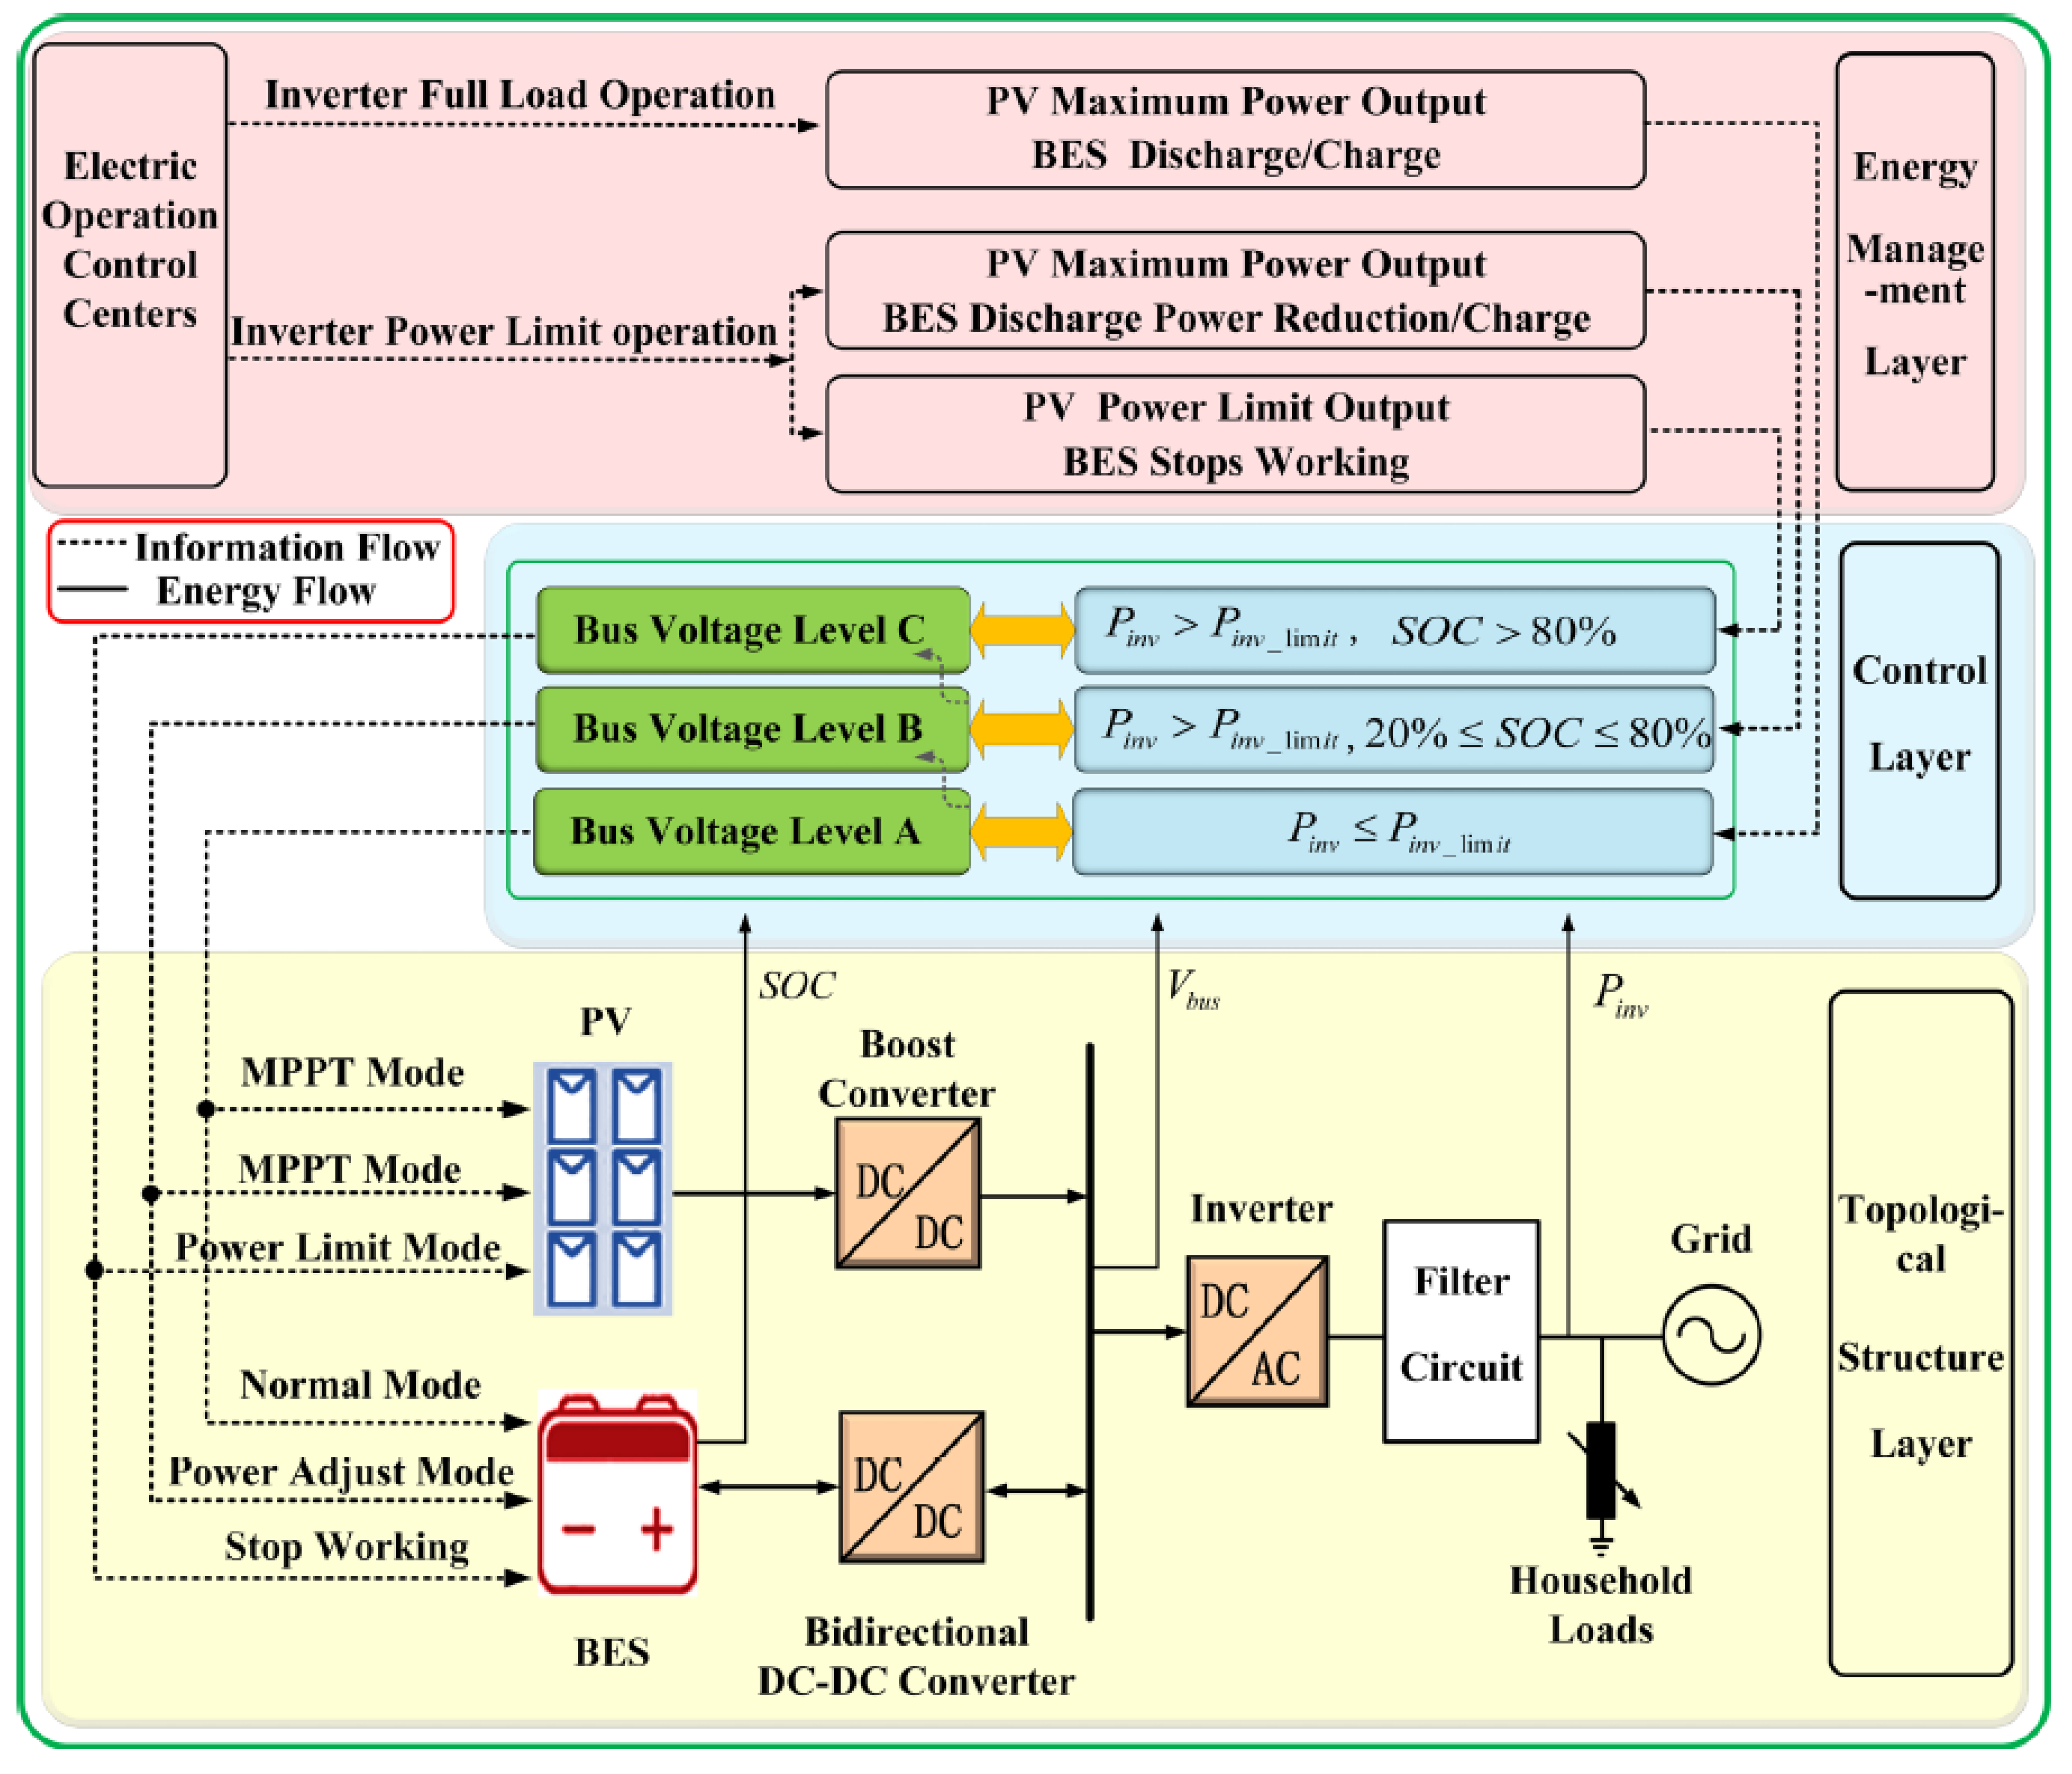 Повер лимит. Energy Storage Inverter. Household Energy Storage System. Single-phase Network Power limiter. Typical High Frequency all-in-one Inverter Block diagram.